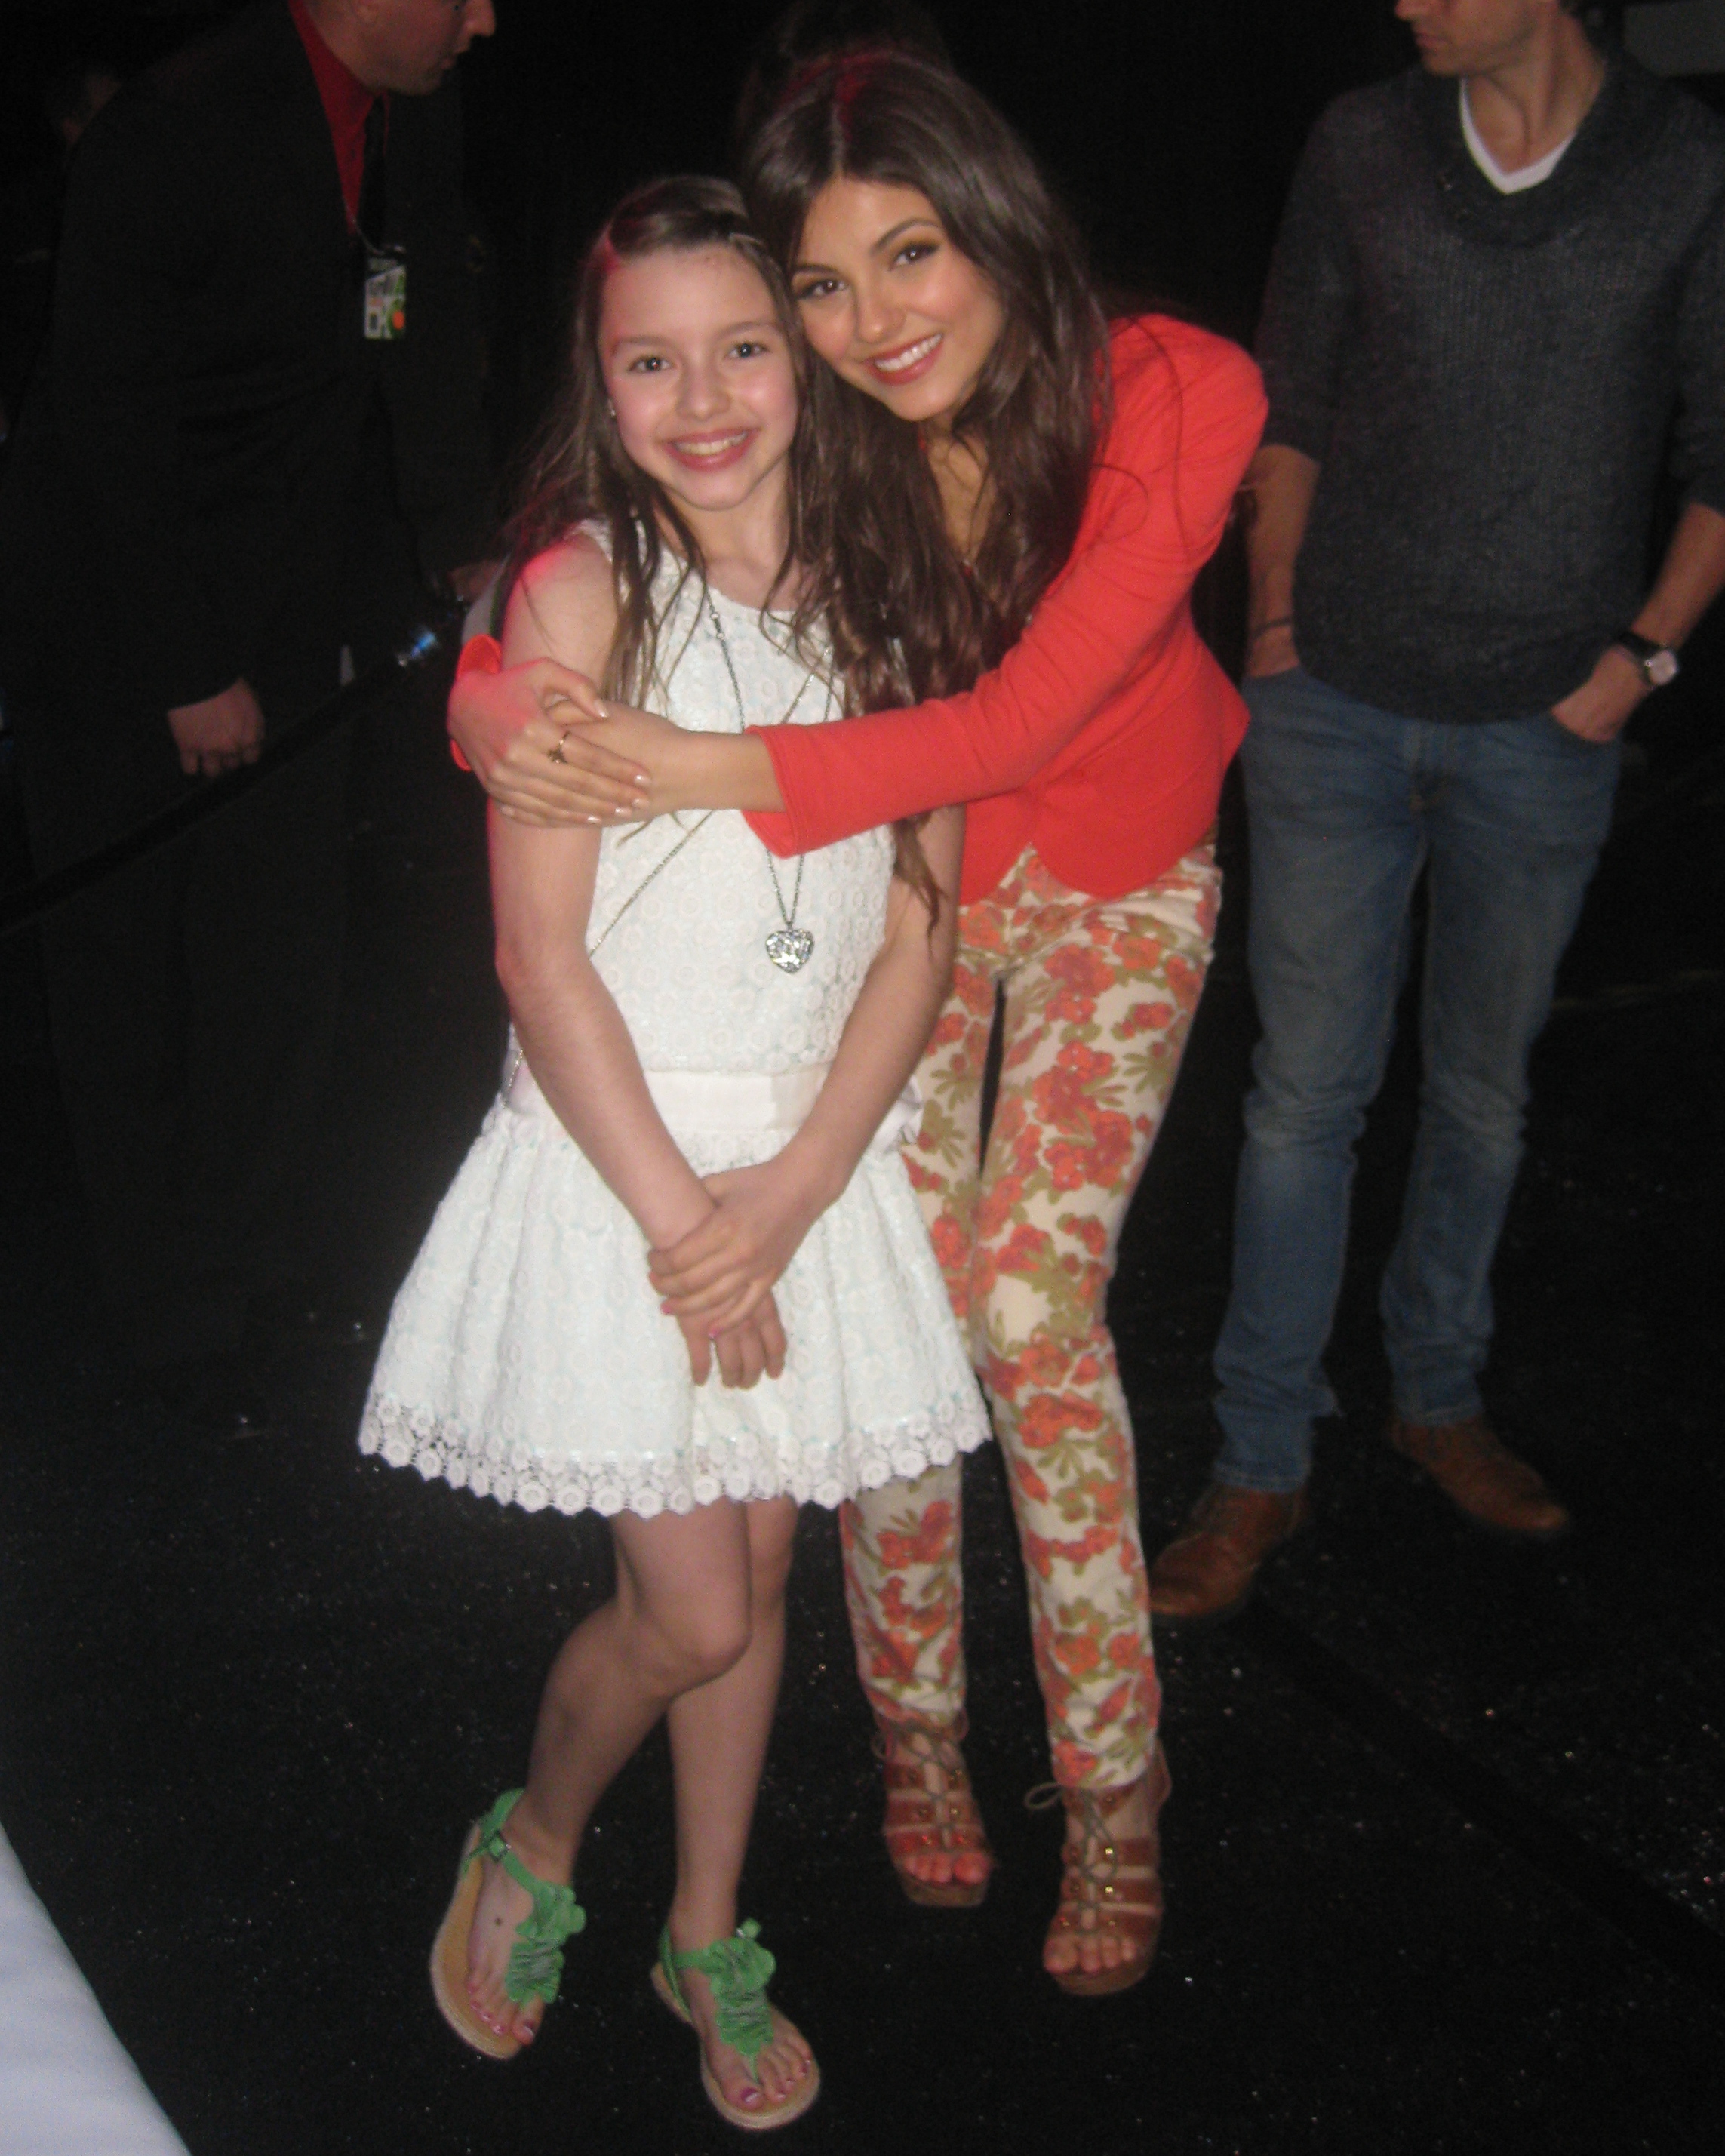 Fátima Ptacek at party with Victoria Justice in Los Angeles - March 30, 2012